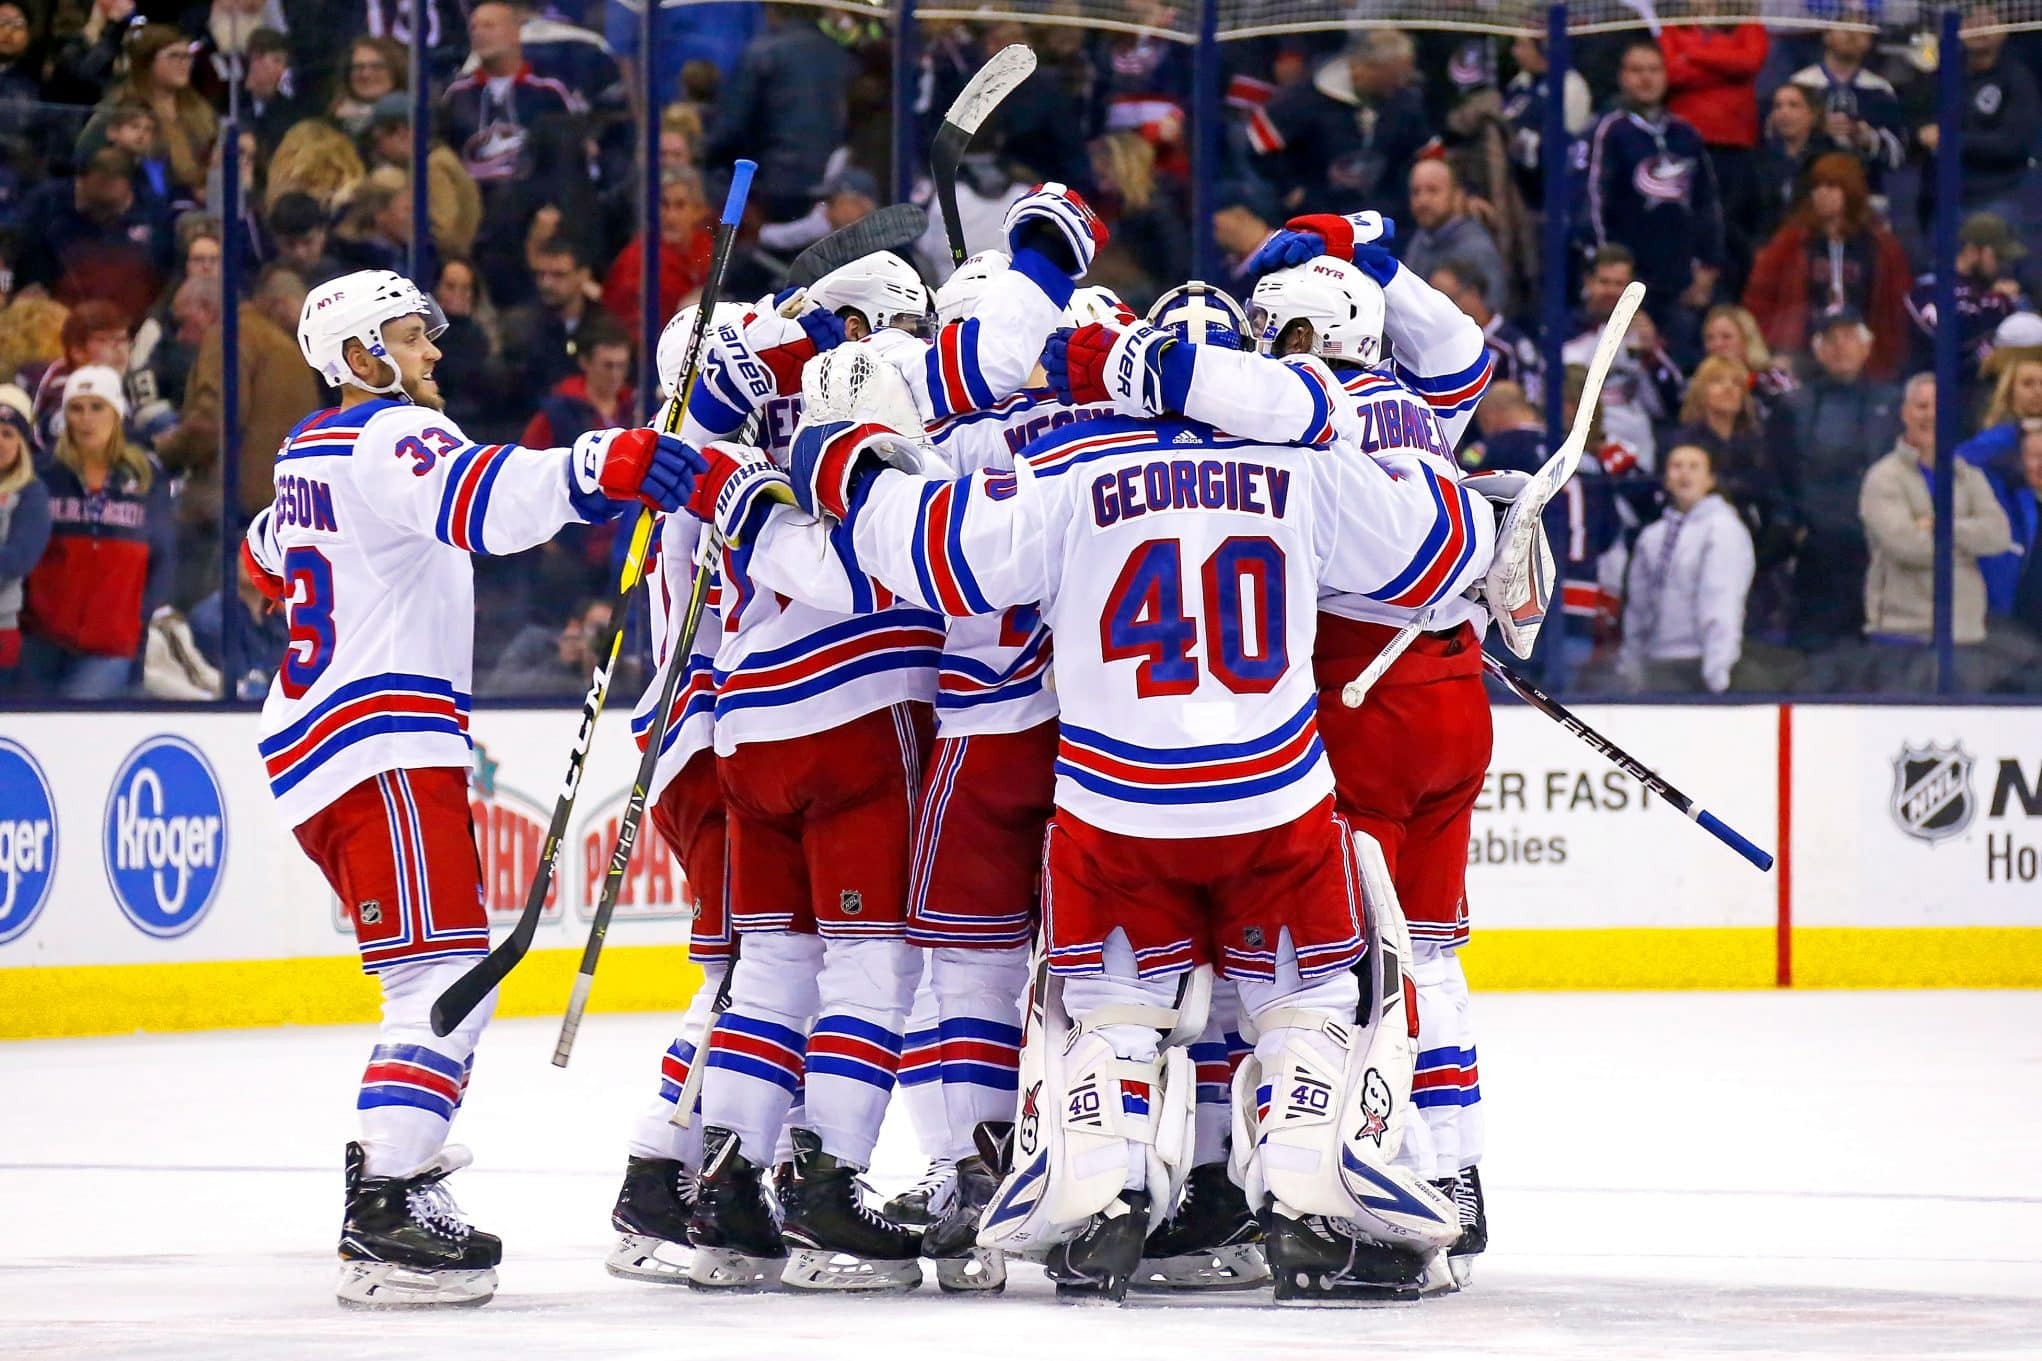 New York Rangers 4 players who will benefit most from the New Year